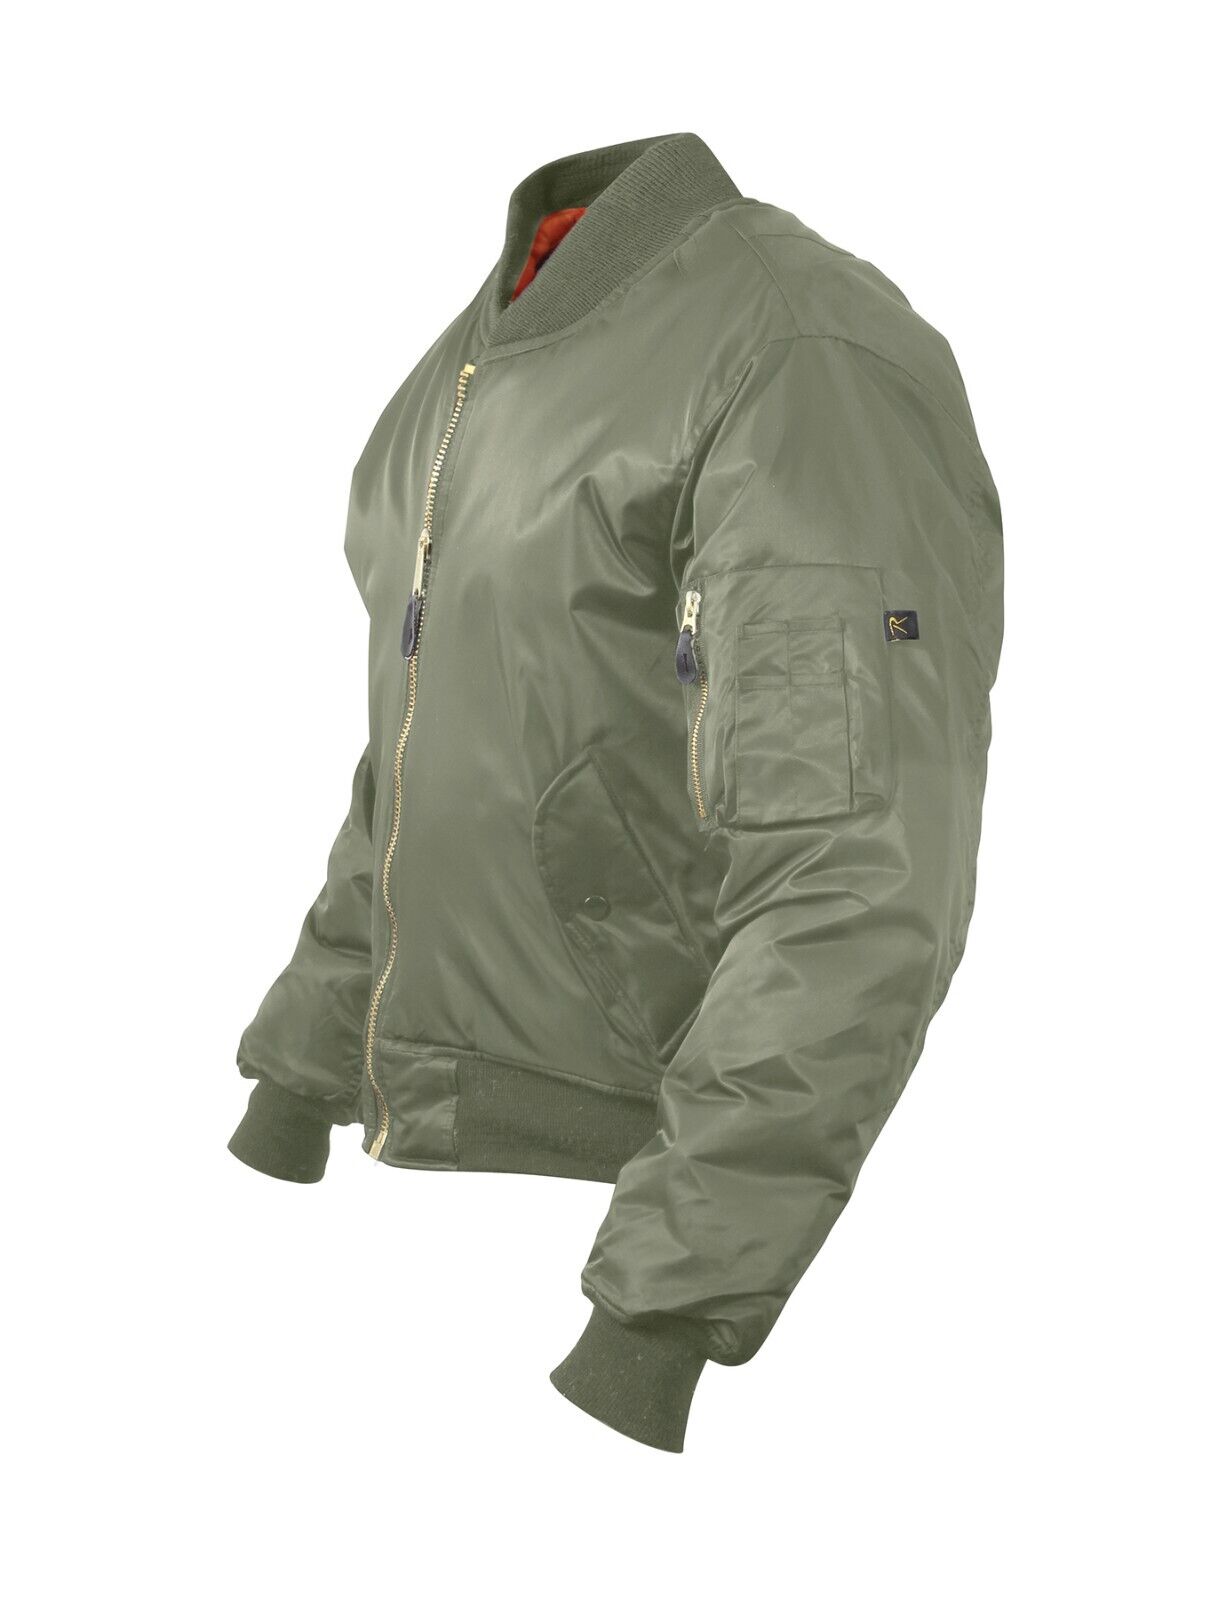 Rothco Men's Concealed Carry MA-1 Sage Green Flight Jacket